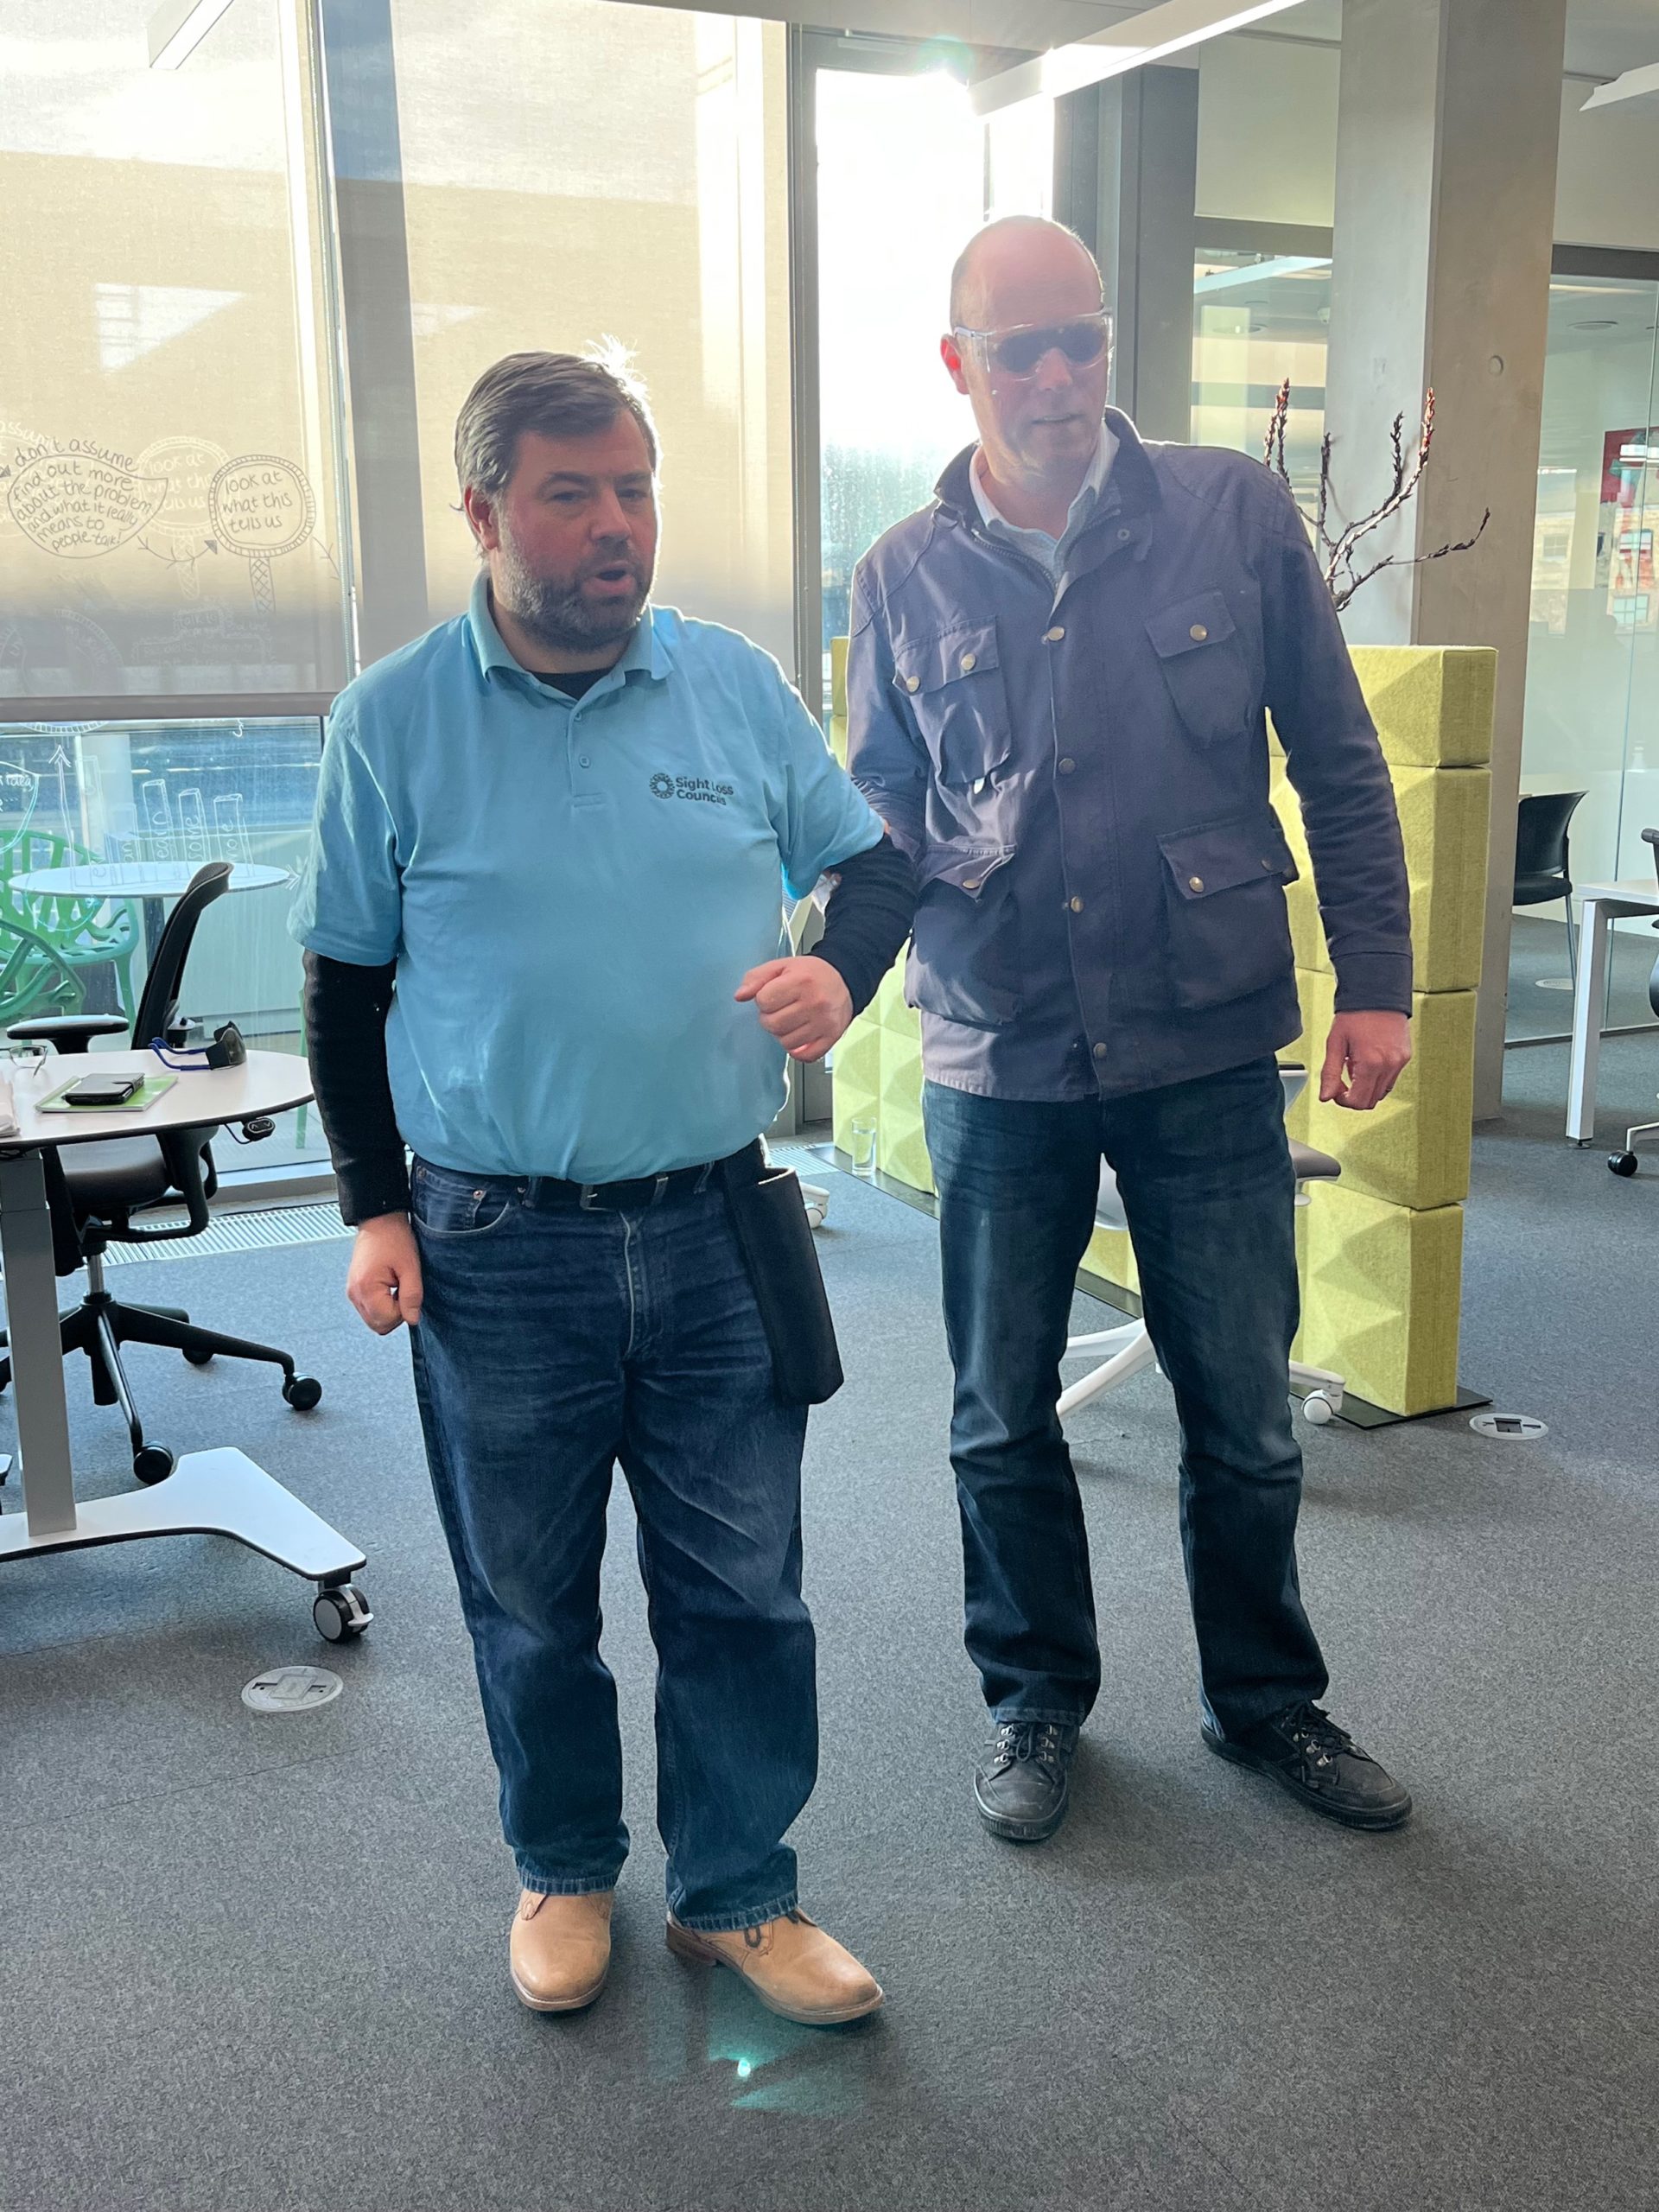 Image shows Steve Reed, London SLC, standing with Richard from thr Transport Design Team. Richard is holding Steve's elbow.